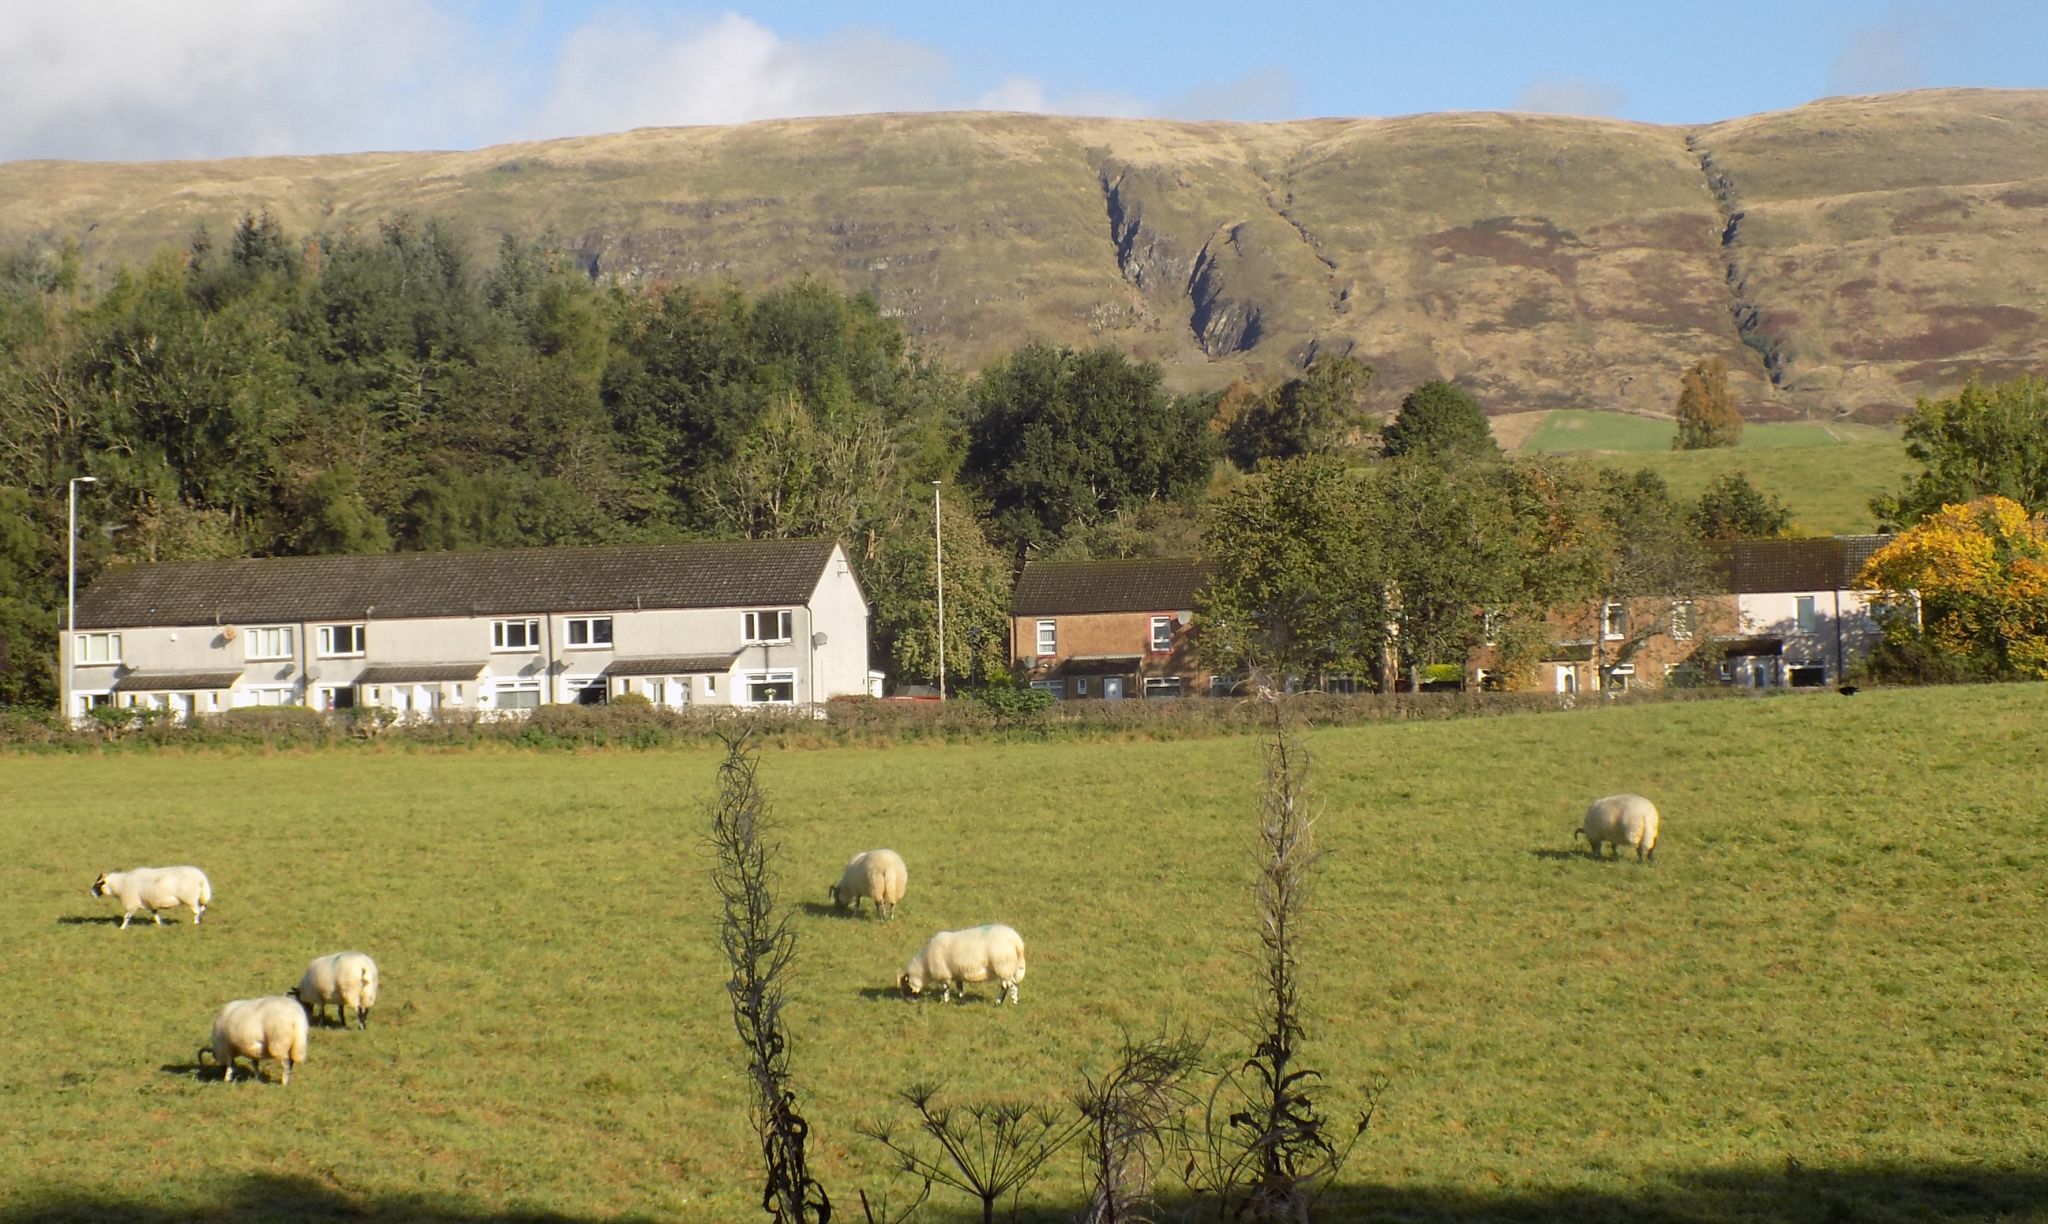 Campsie Fells from the Strathkelvin Railway Path between Lennoxtown and Milton of Campsie